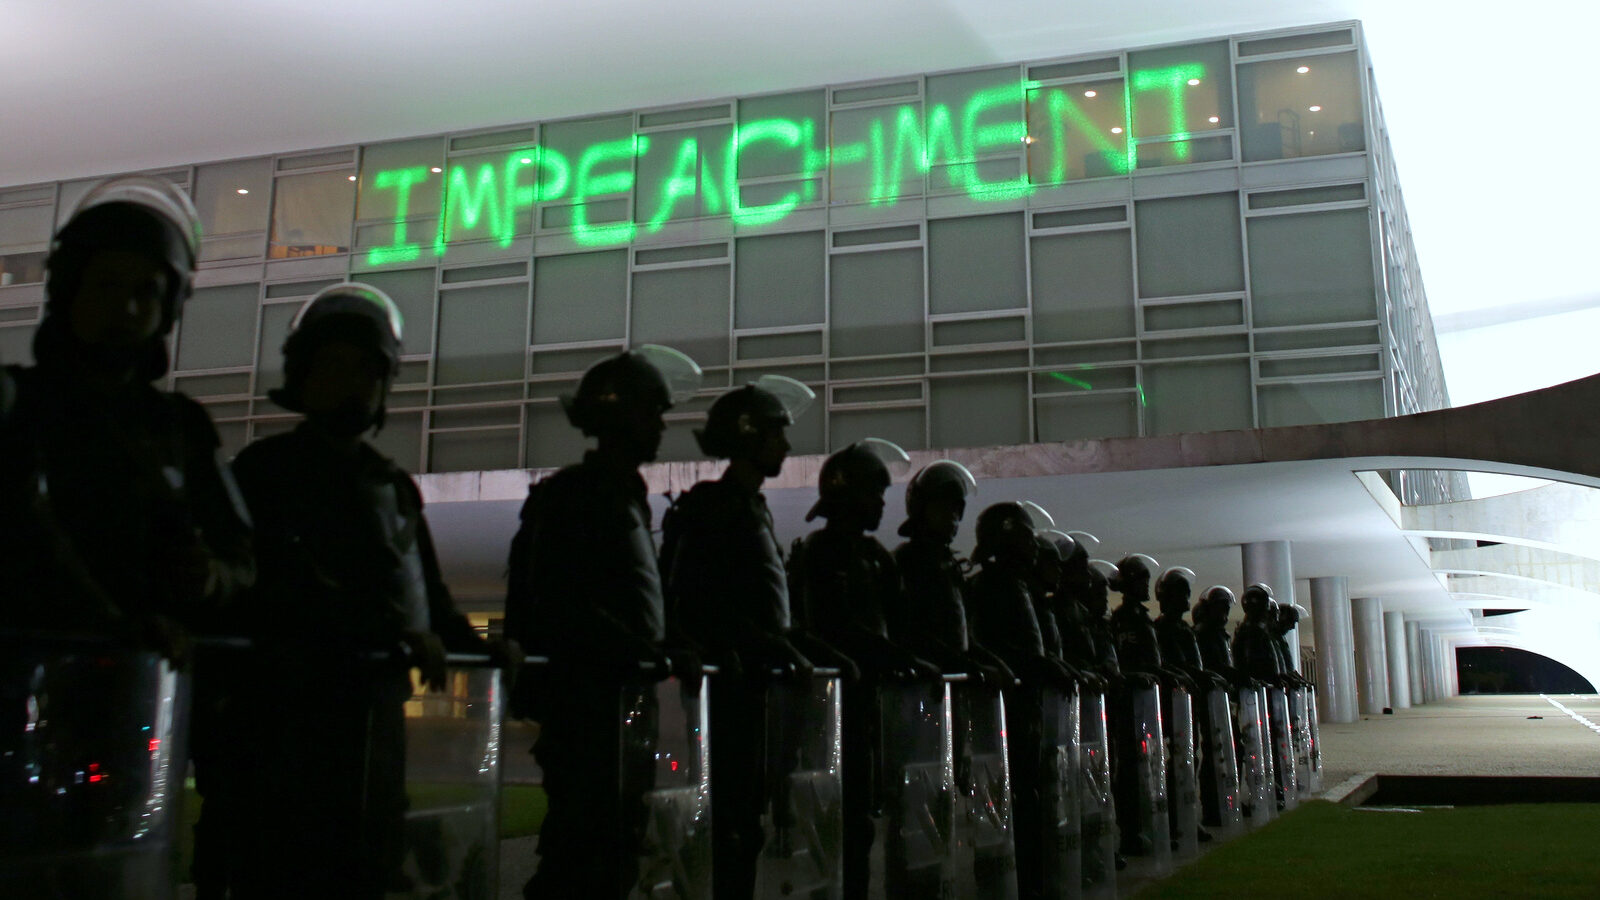 Soldiers stand guard outside Planalto presidential palace where protesters have projected the word "Impeachment" on the building, as they call for the impeachment of Brazil's President Dilma Rousseff in Brasilia, Brazil, Monday, March 21, 2016. (AP/Eraldo Peres)